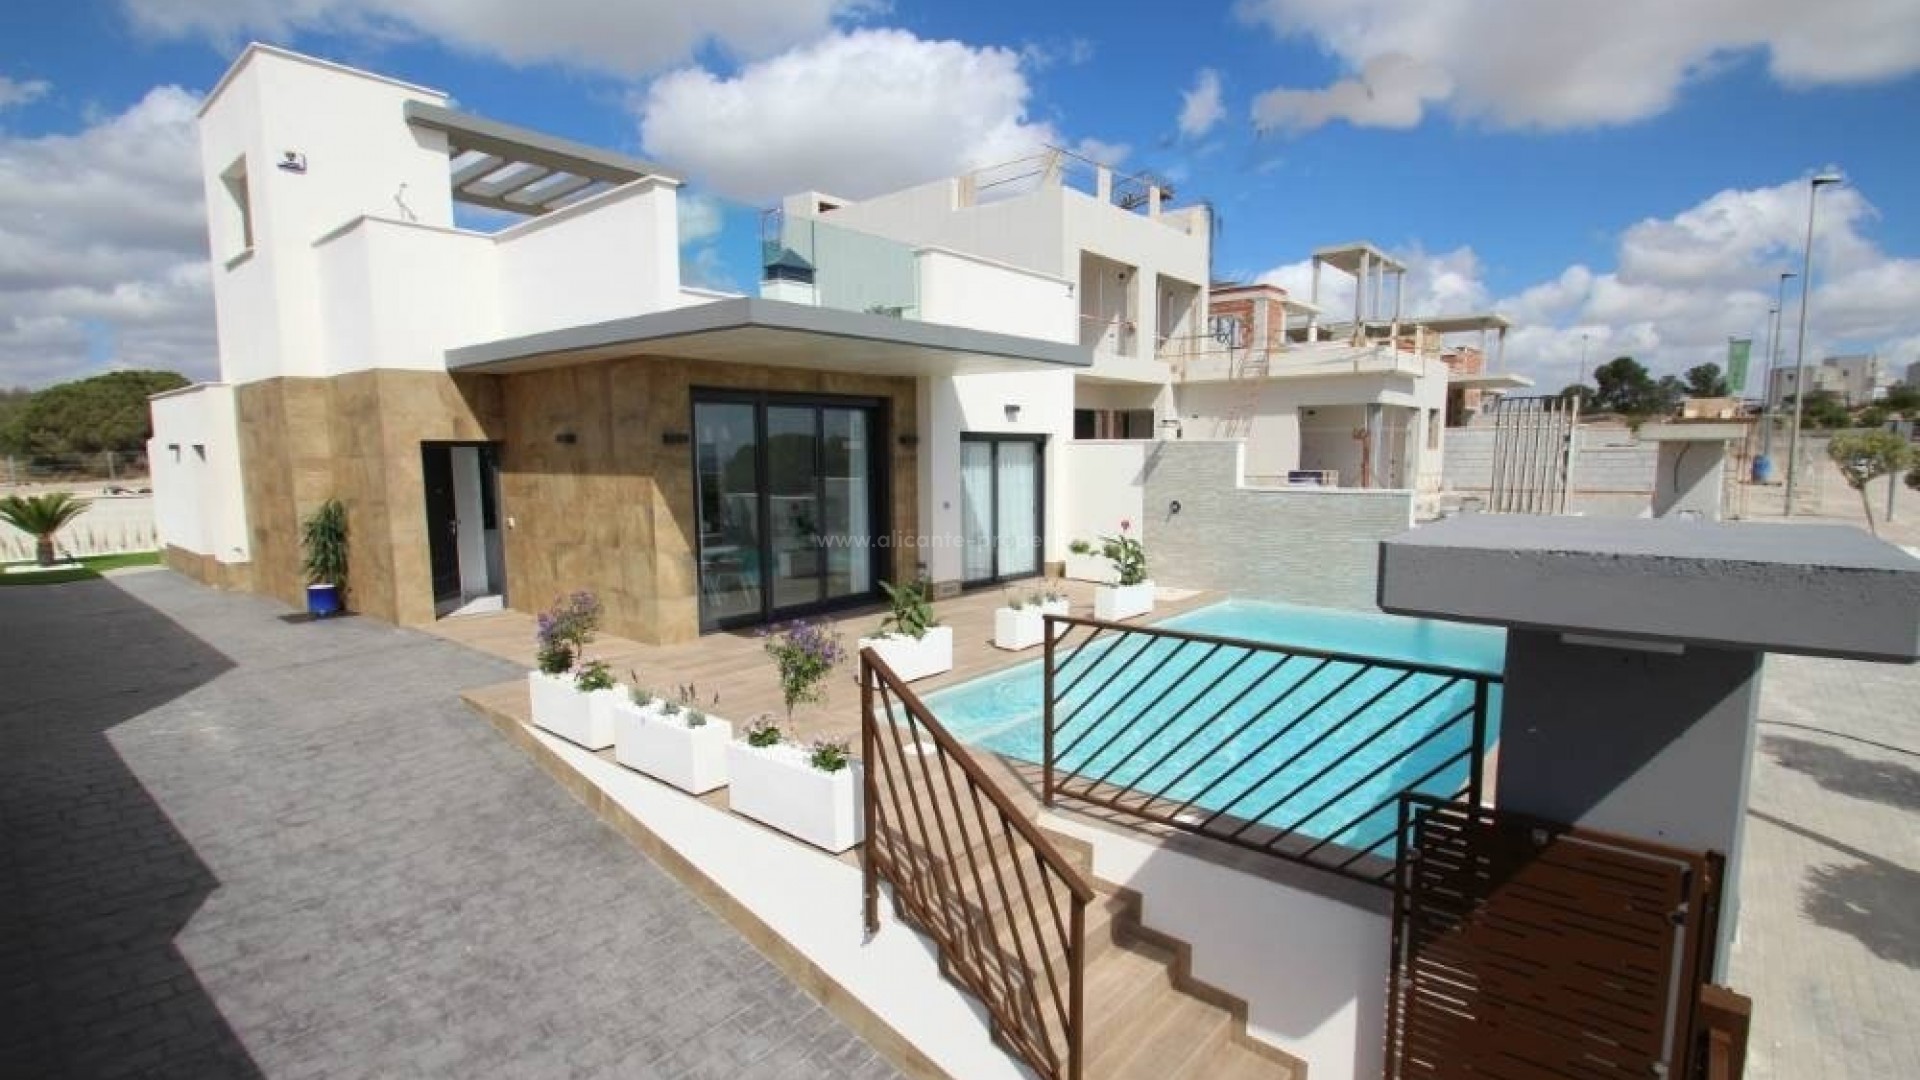 Exclusive villas/houses in San Miguel de Salinas, near Torrevieja, 3 bedrooms, 3 bathrooms, terrace and solarium, private garden with swimming pool and driveway